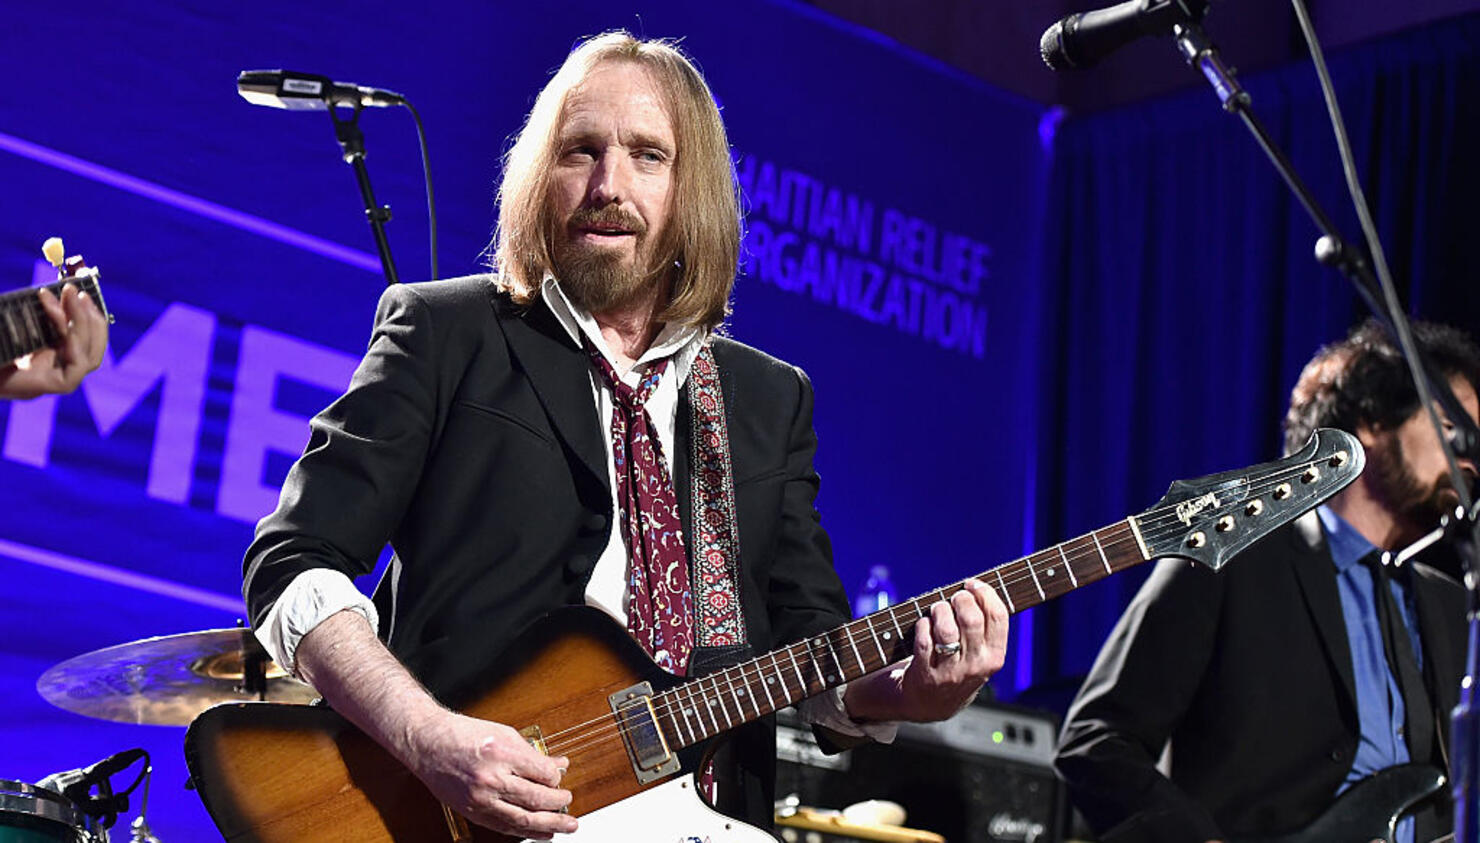 Watch Previously Unreleased Video for Tom Petty's "Keep a Little Soul"